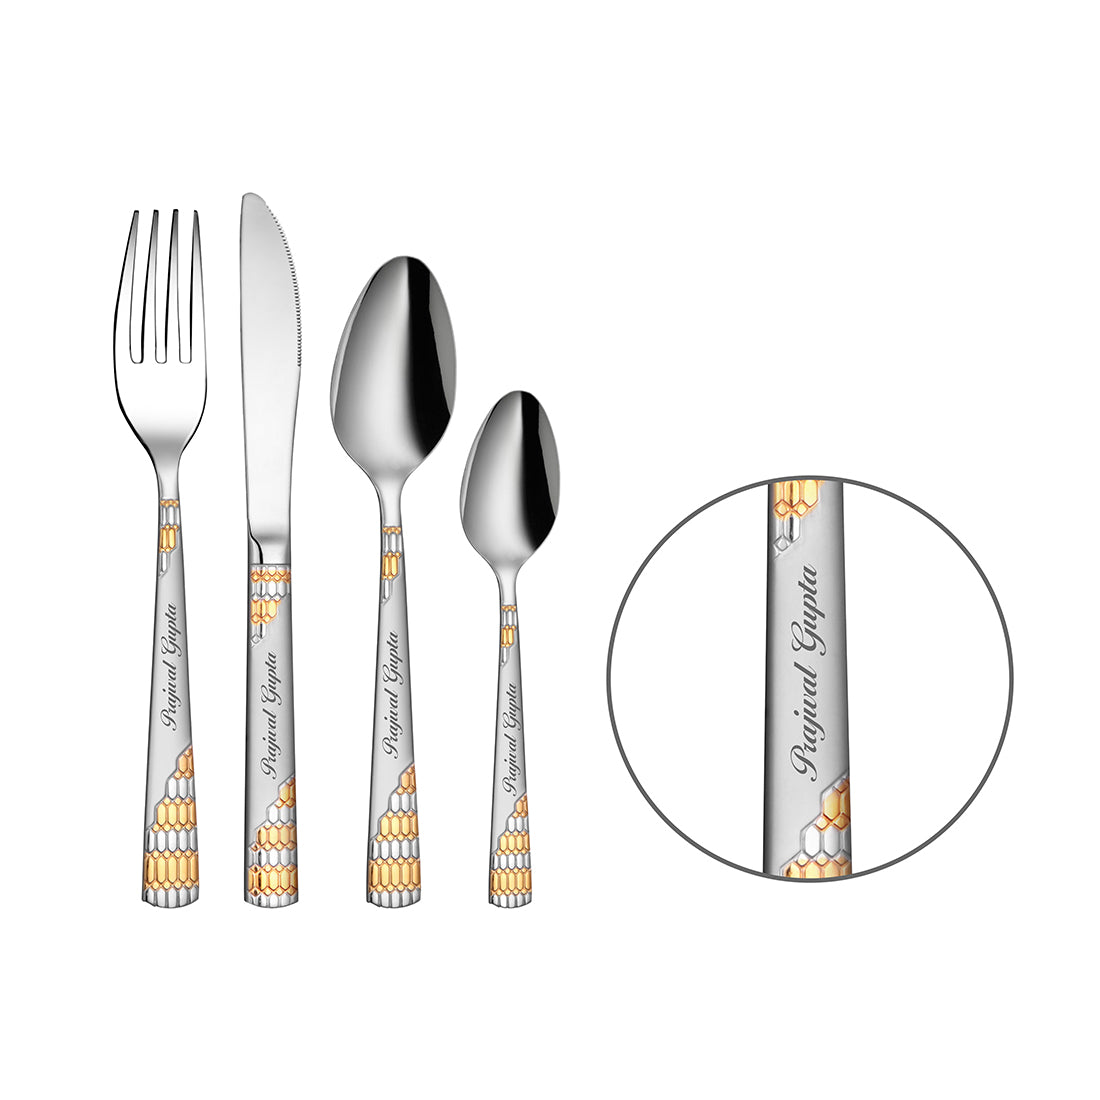 Get Your Cutlery Sets Customized Today